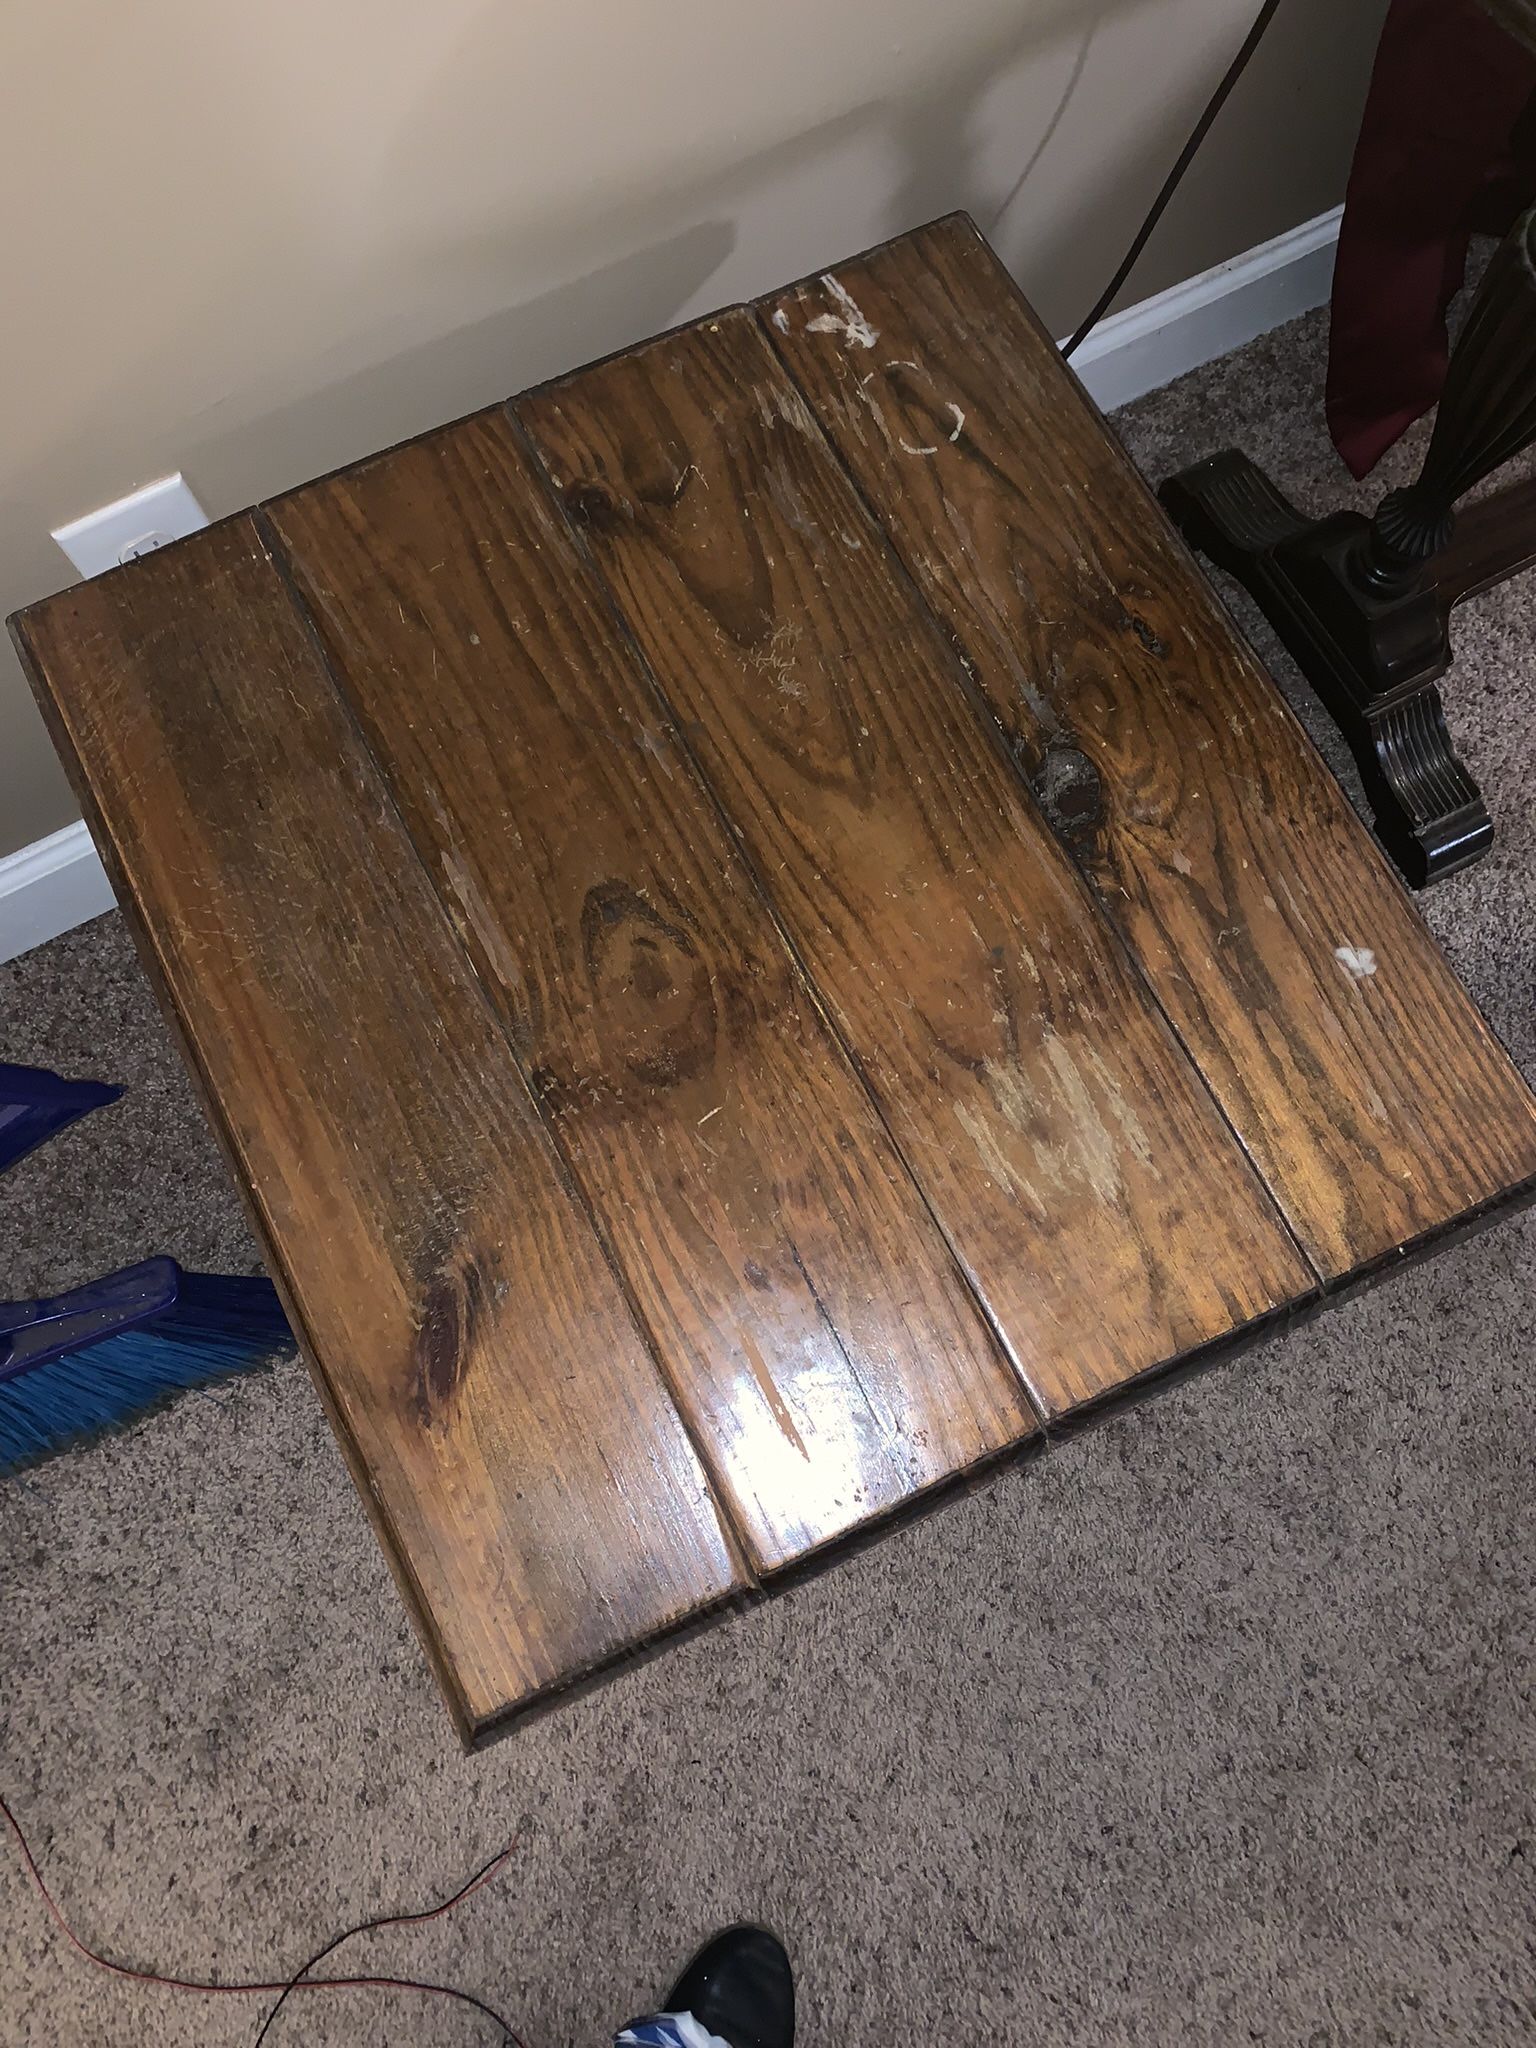 2 End Tables 